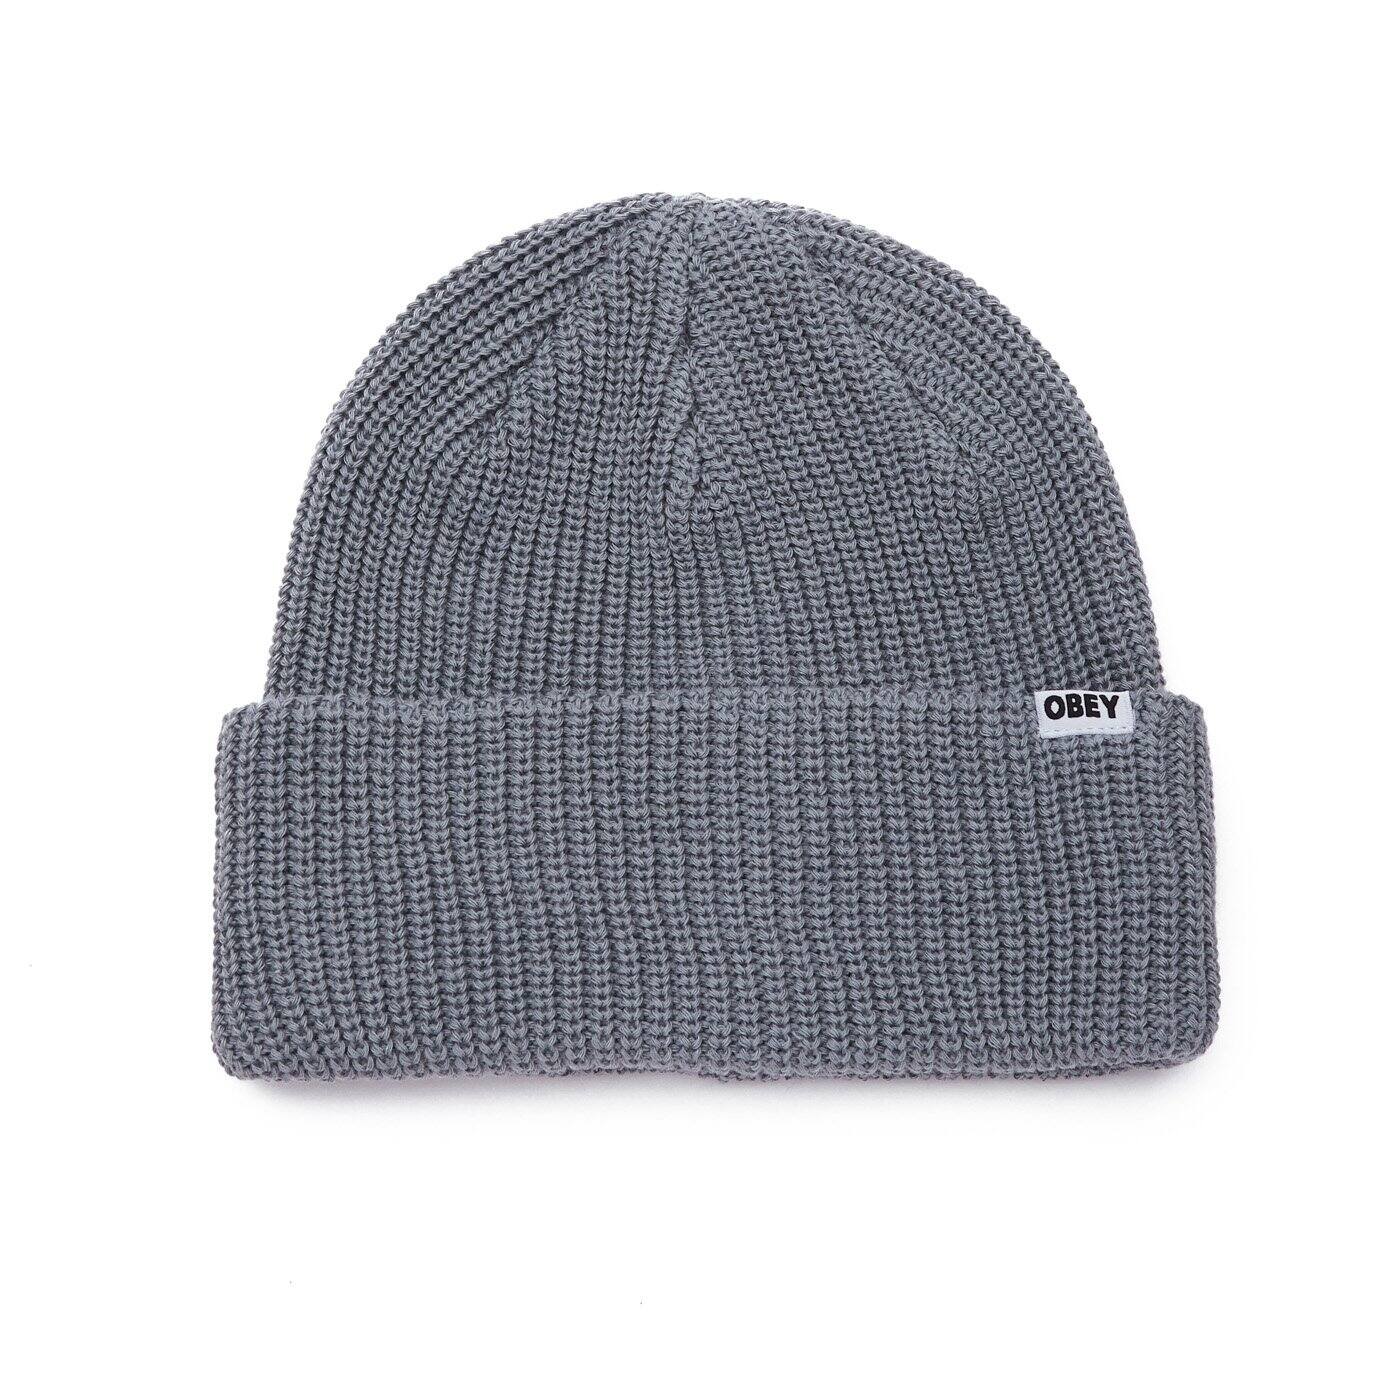 OBEY BOLD ORGANIC HAT ( 4 colors )